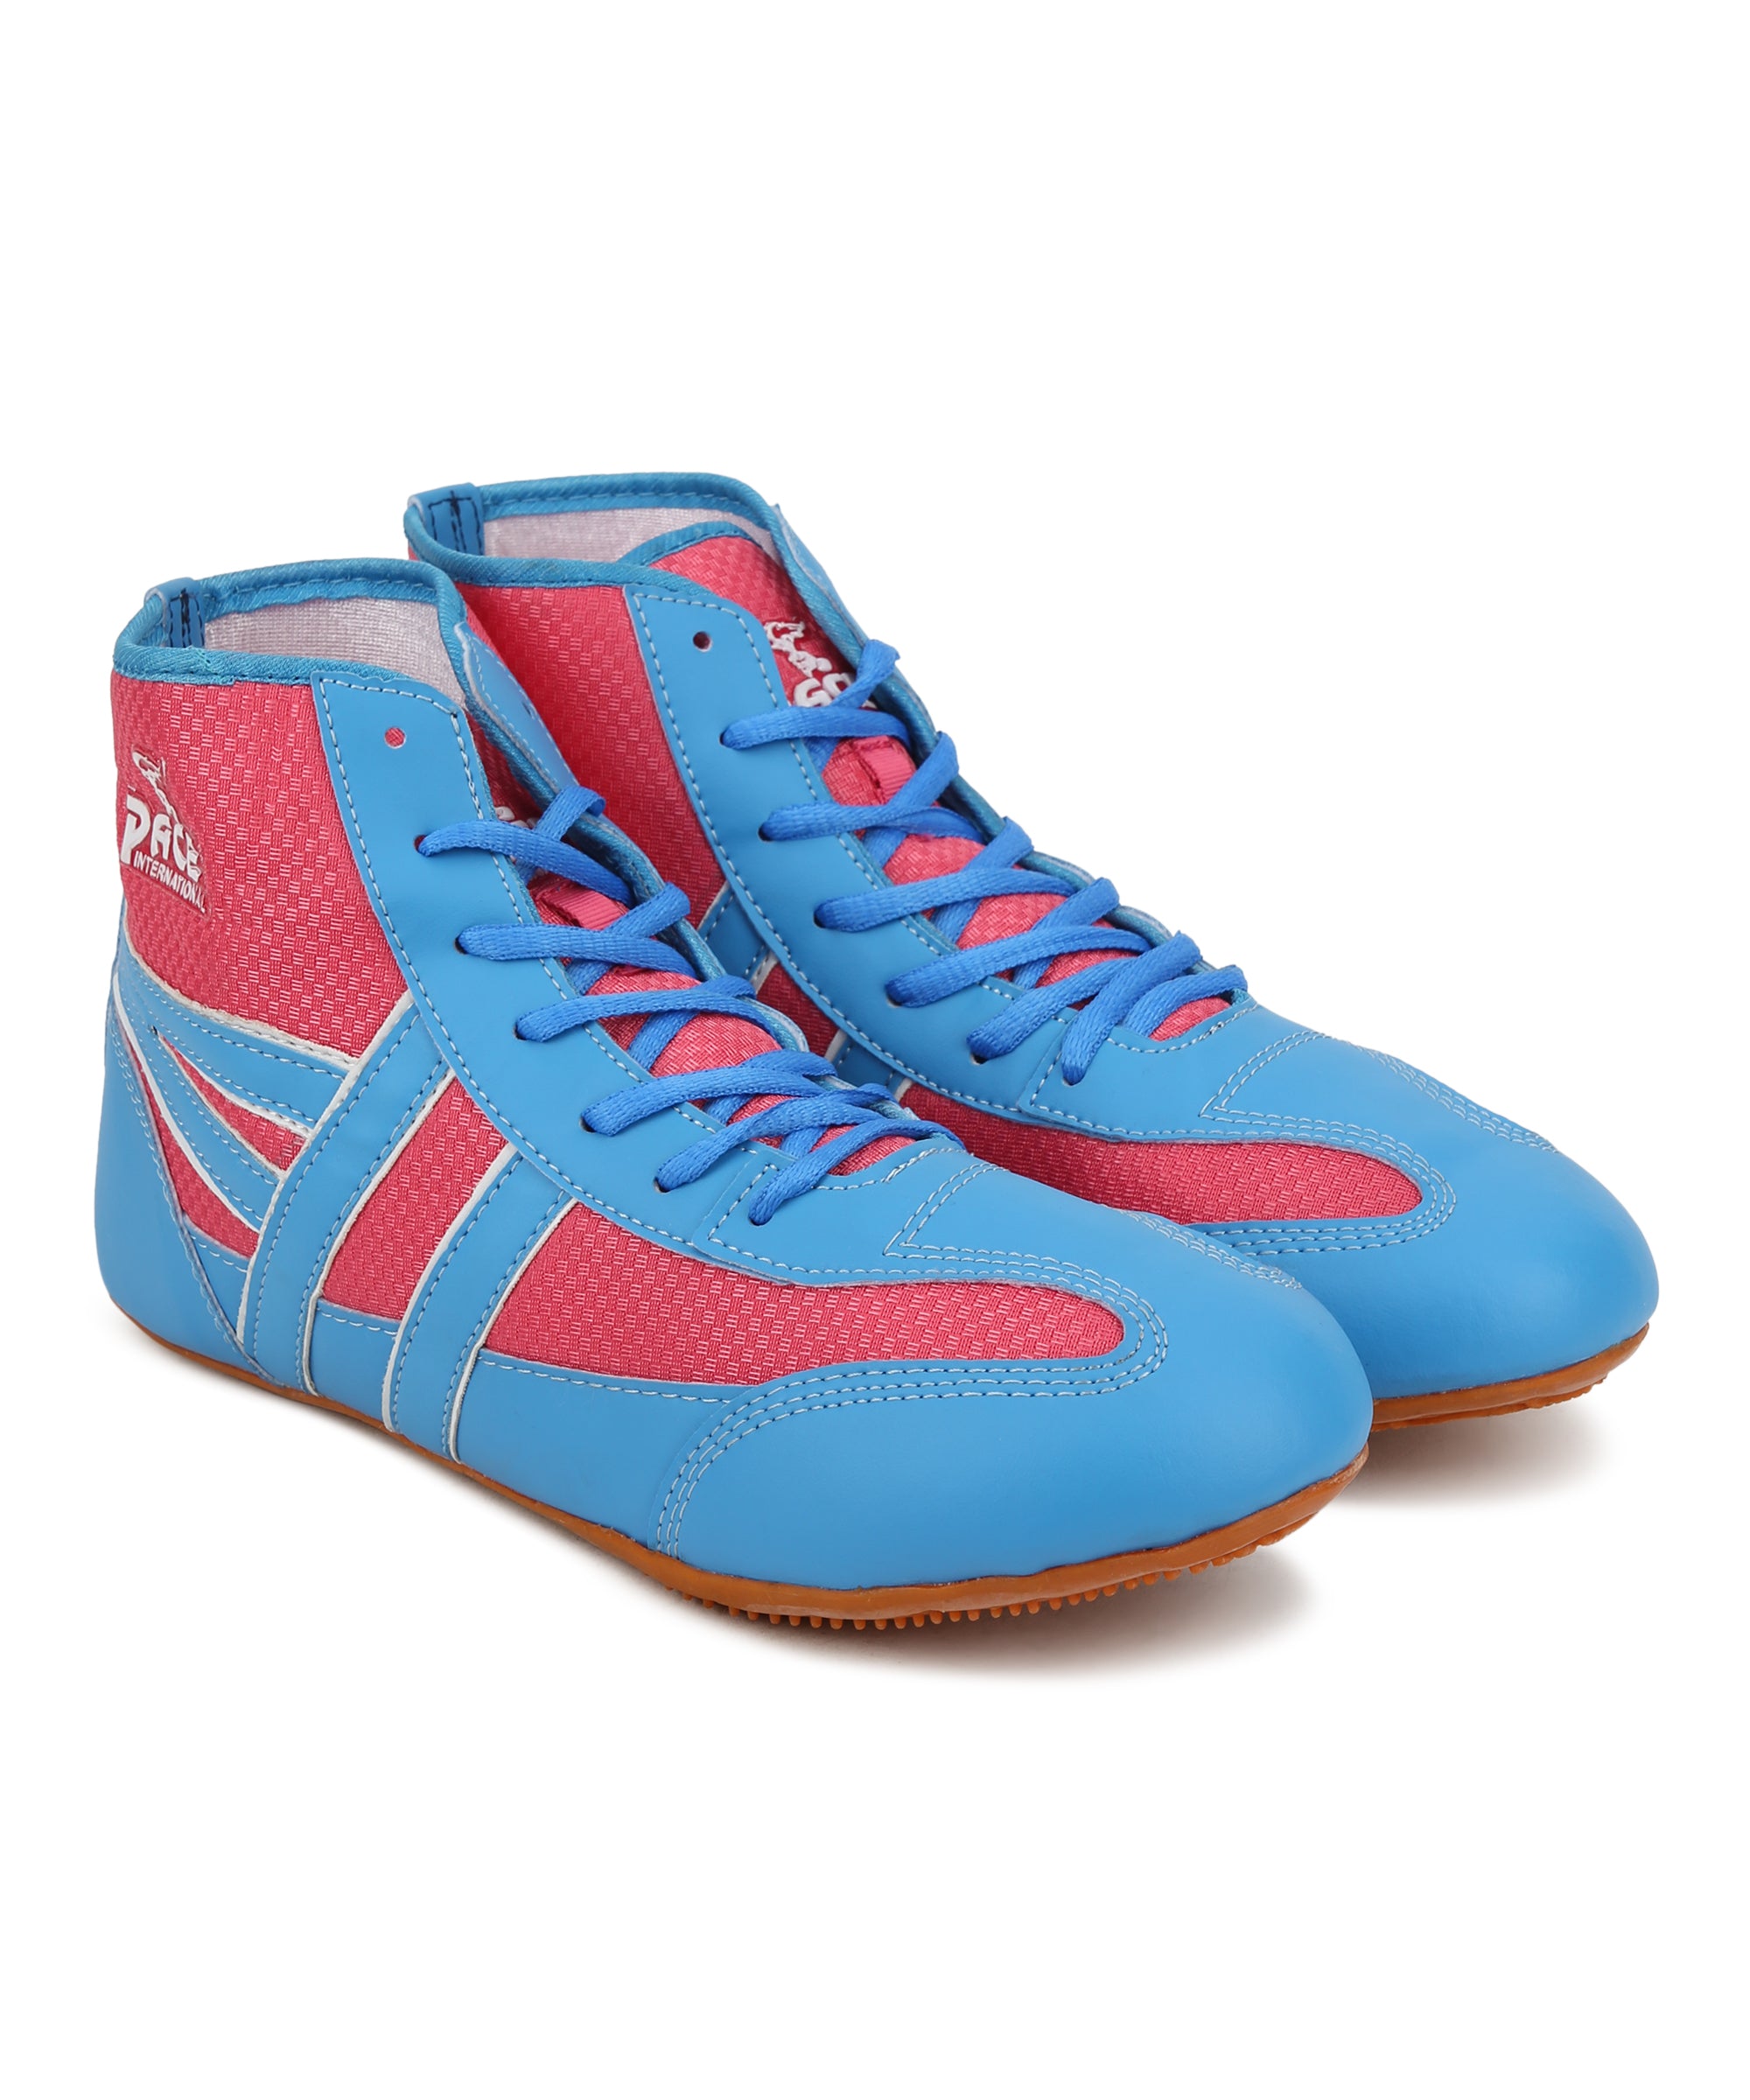 kabaddi mat shoes different size and